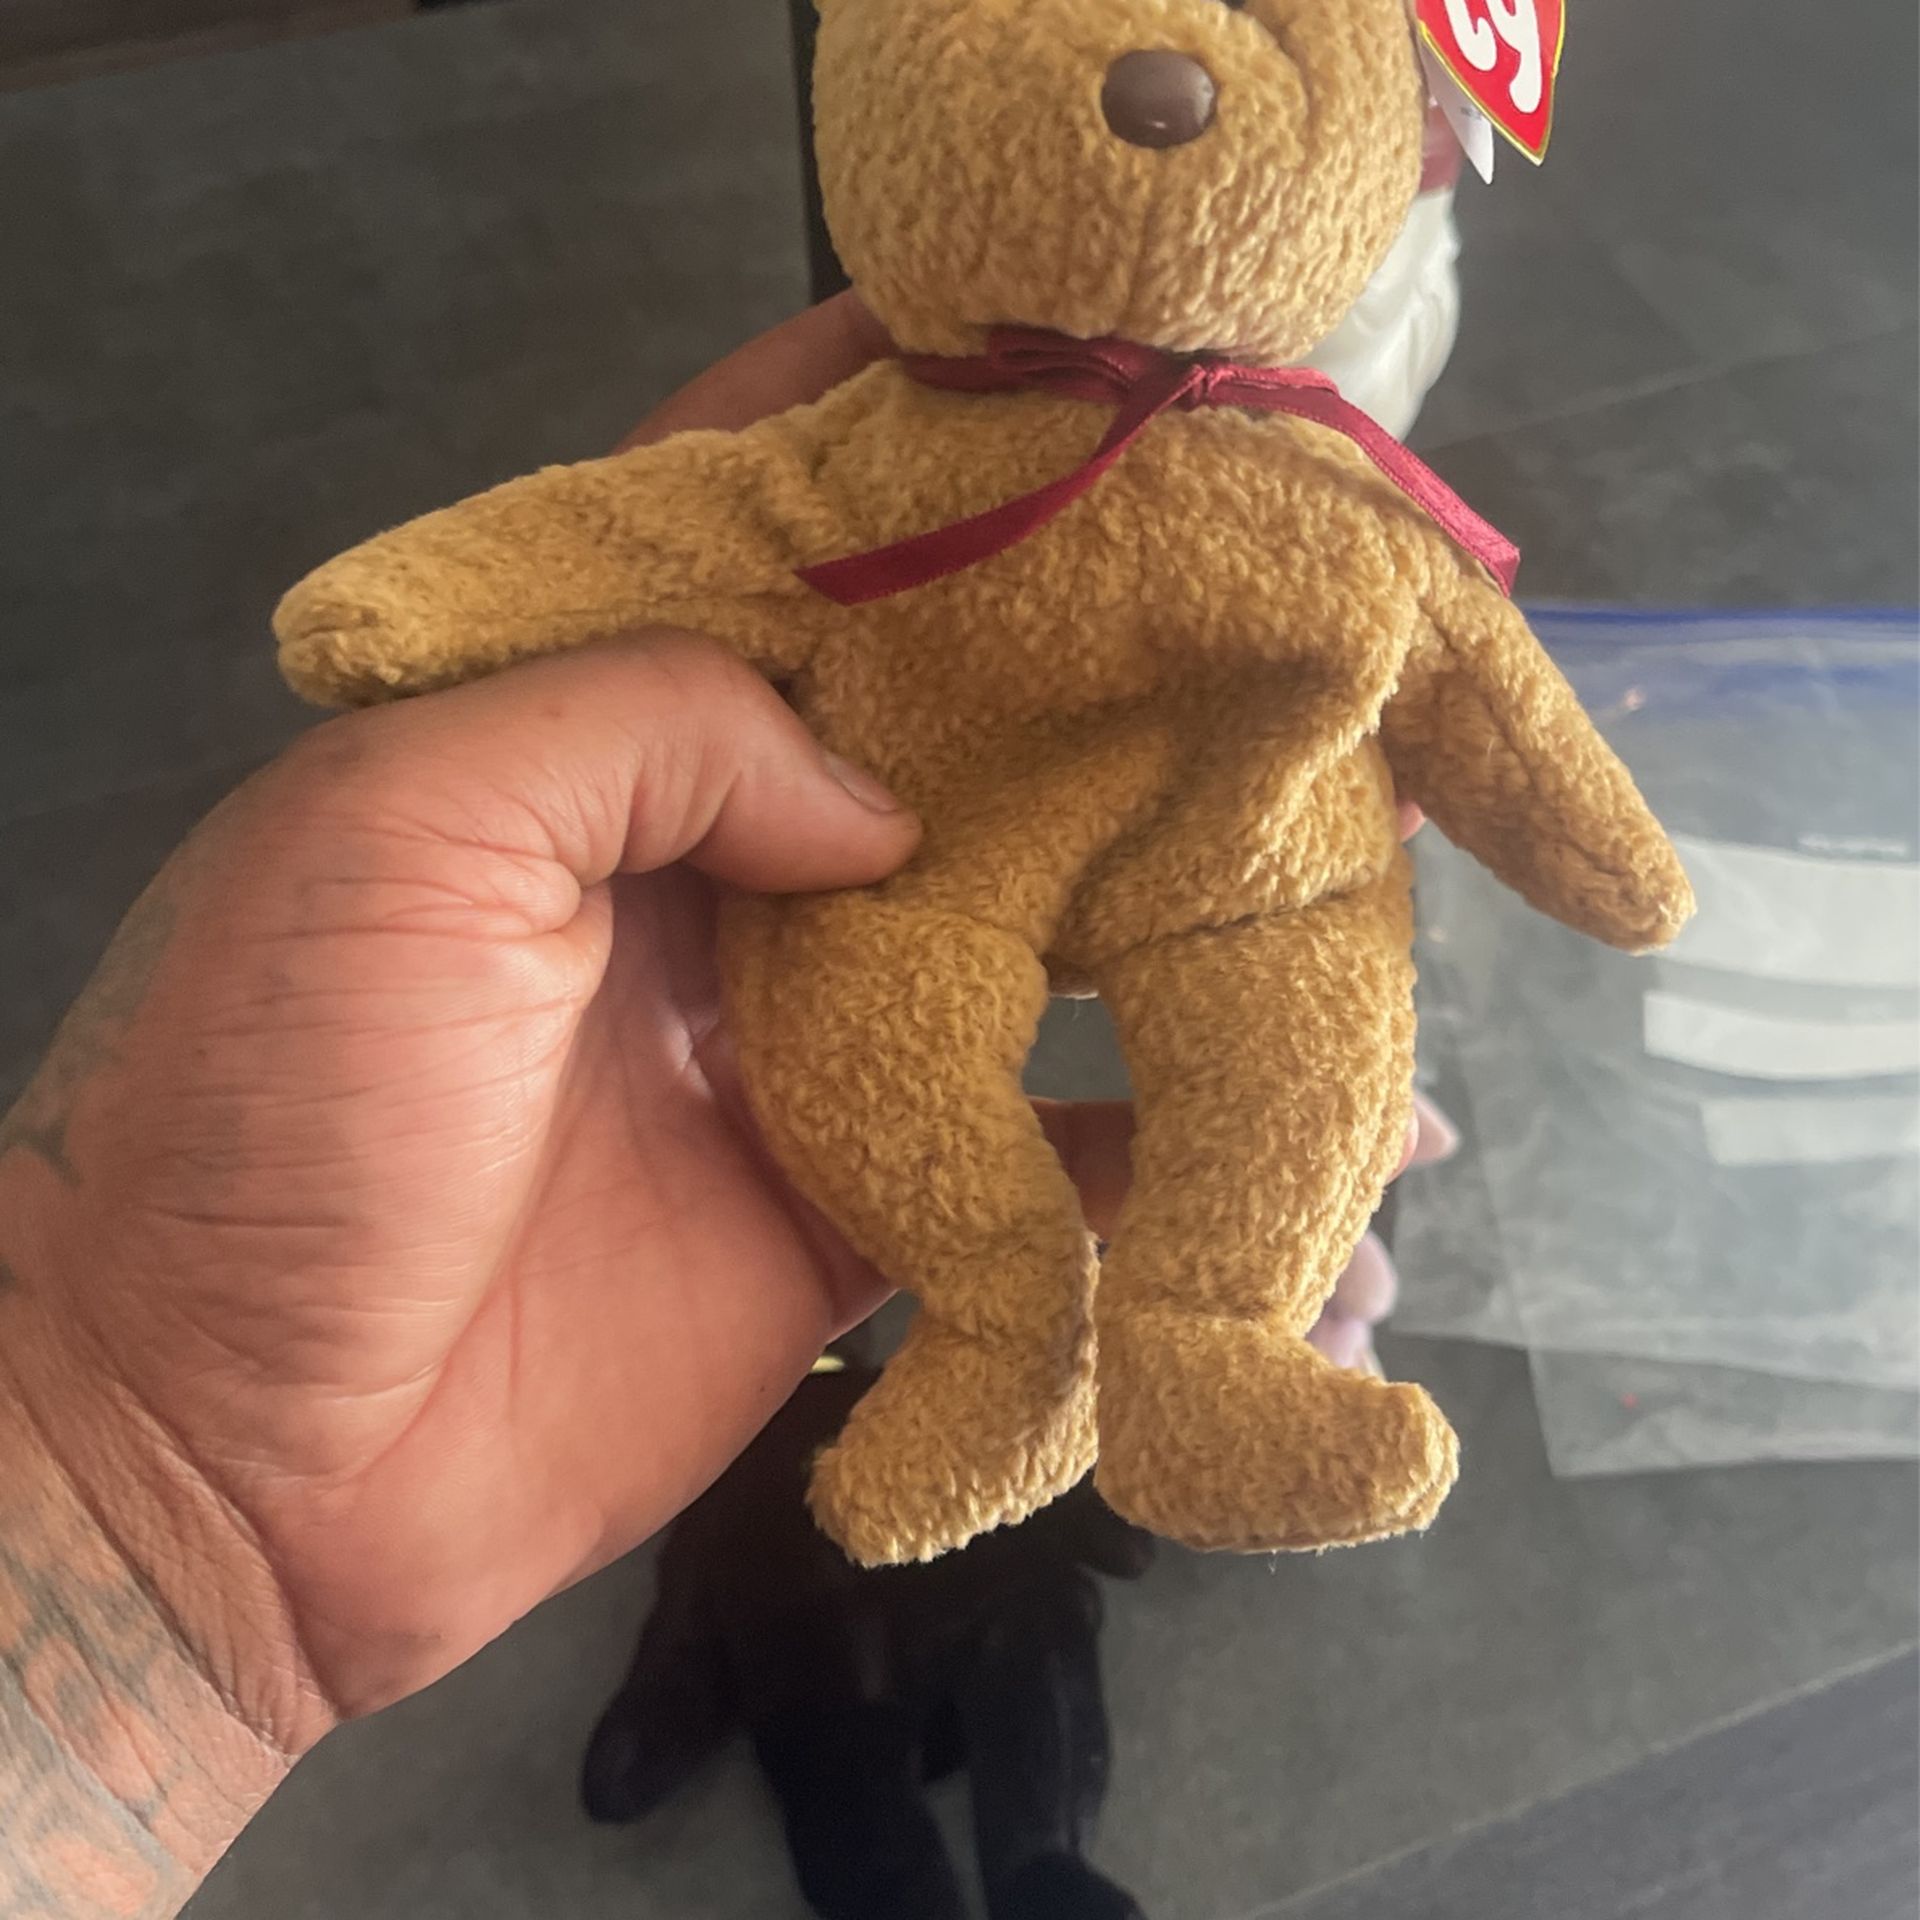 Best Offer Curly The Bear The End Bear Ty Beanie Baby Original 